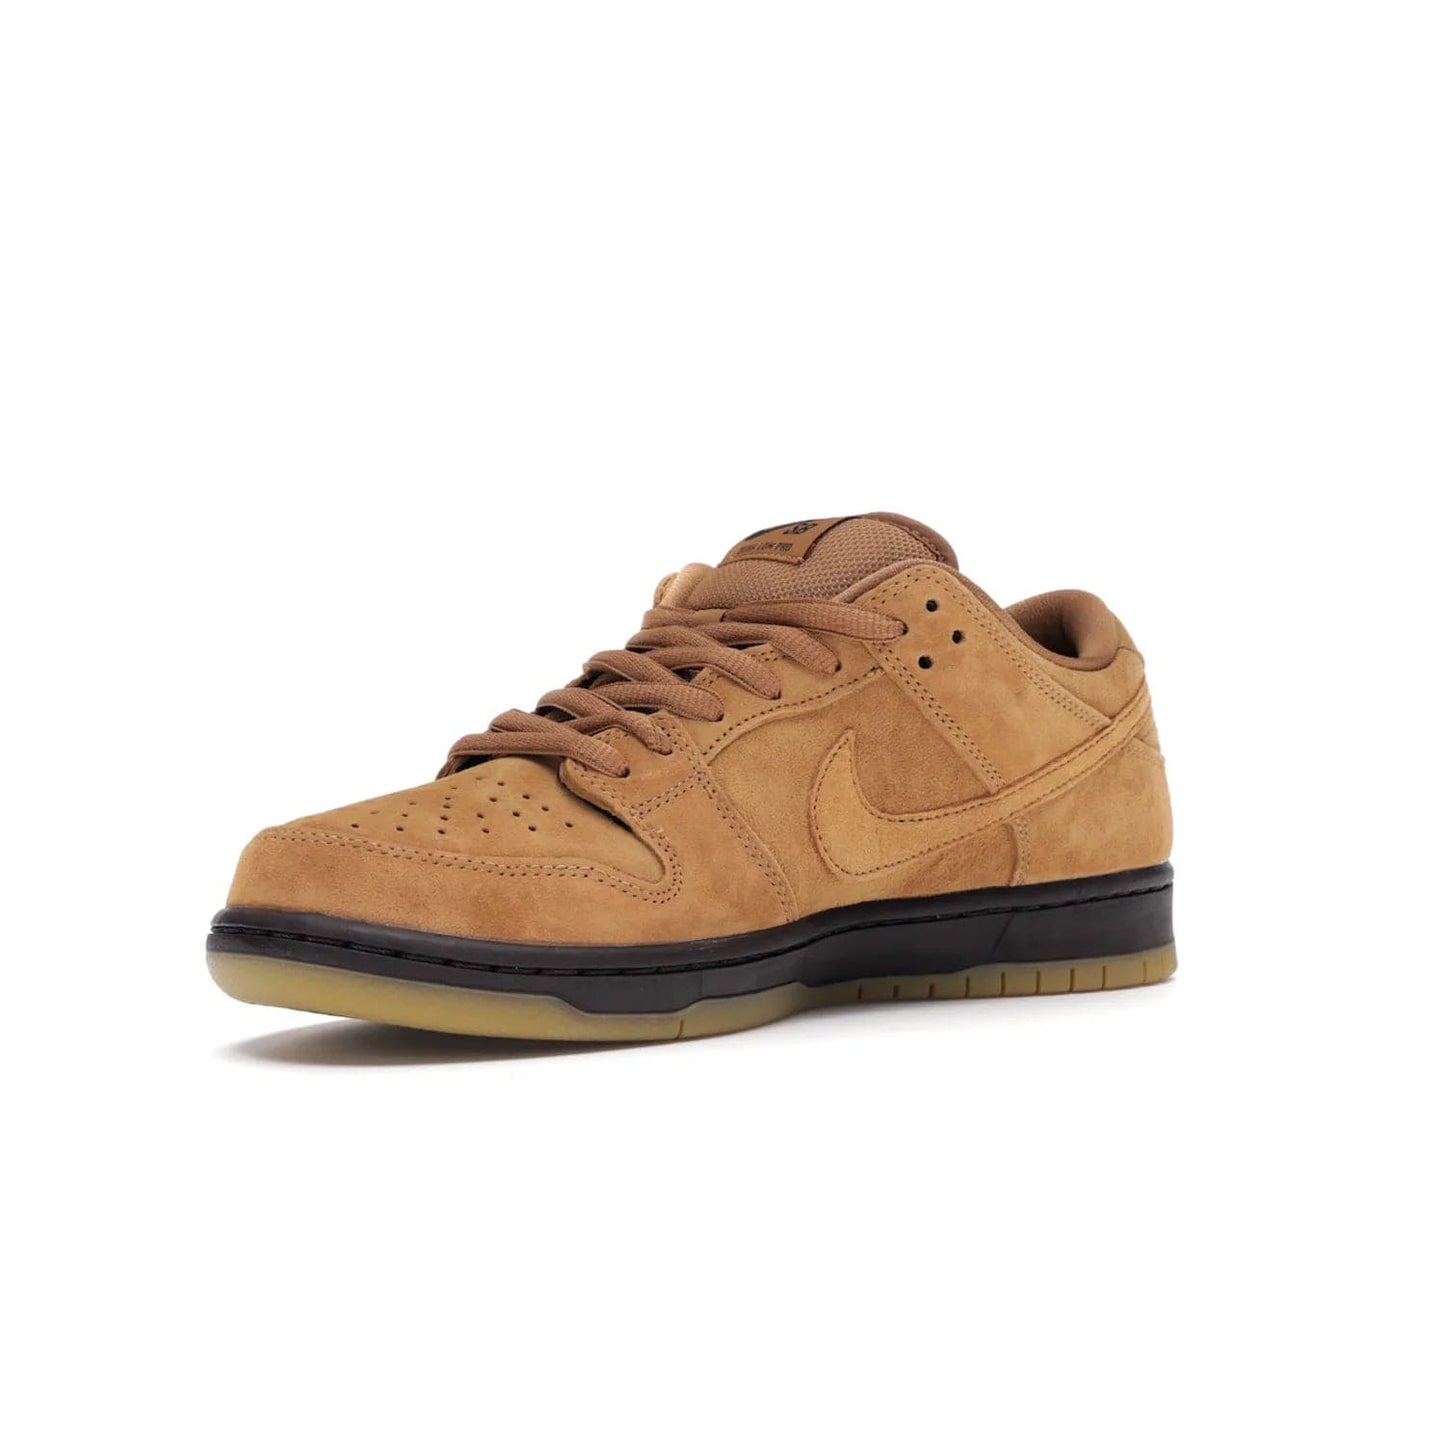 Nike SB Dunk Low Wheat (2021/2023) - Image 15 - Only at www.BallersClubKickz.com - The Nike SB Dunk Low Wheat (2021/2023)has a sleek silhouette and wheat suede upper. Tan tones for lining, mesh tongues, and laces. Iconic color palette midsole, perforated boxing toe. Brown branding on tongue and heel. Gum rubber outsole with partitioned pattern for traction. Eschewed in Feb 2021 for $110.